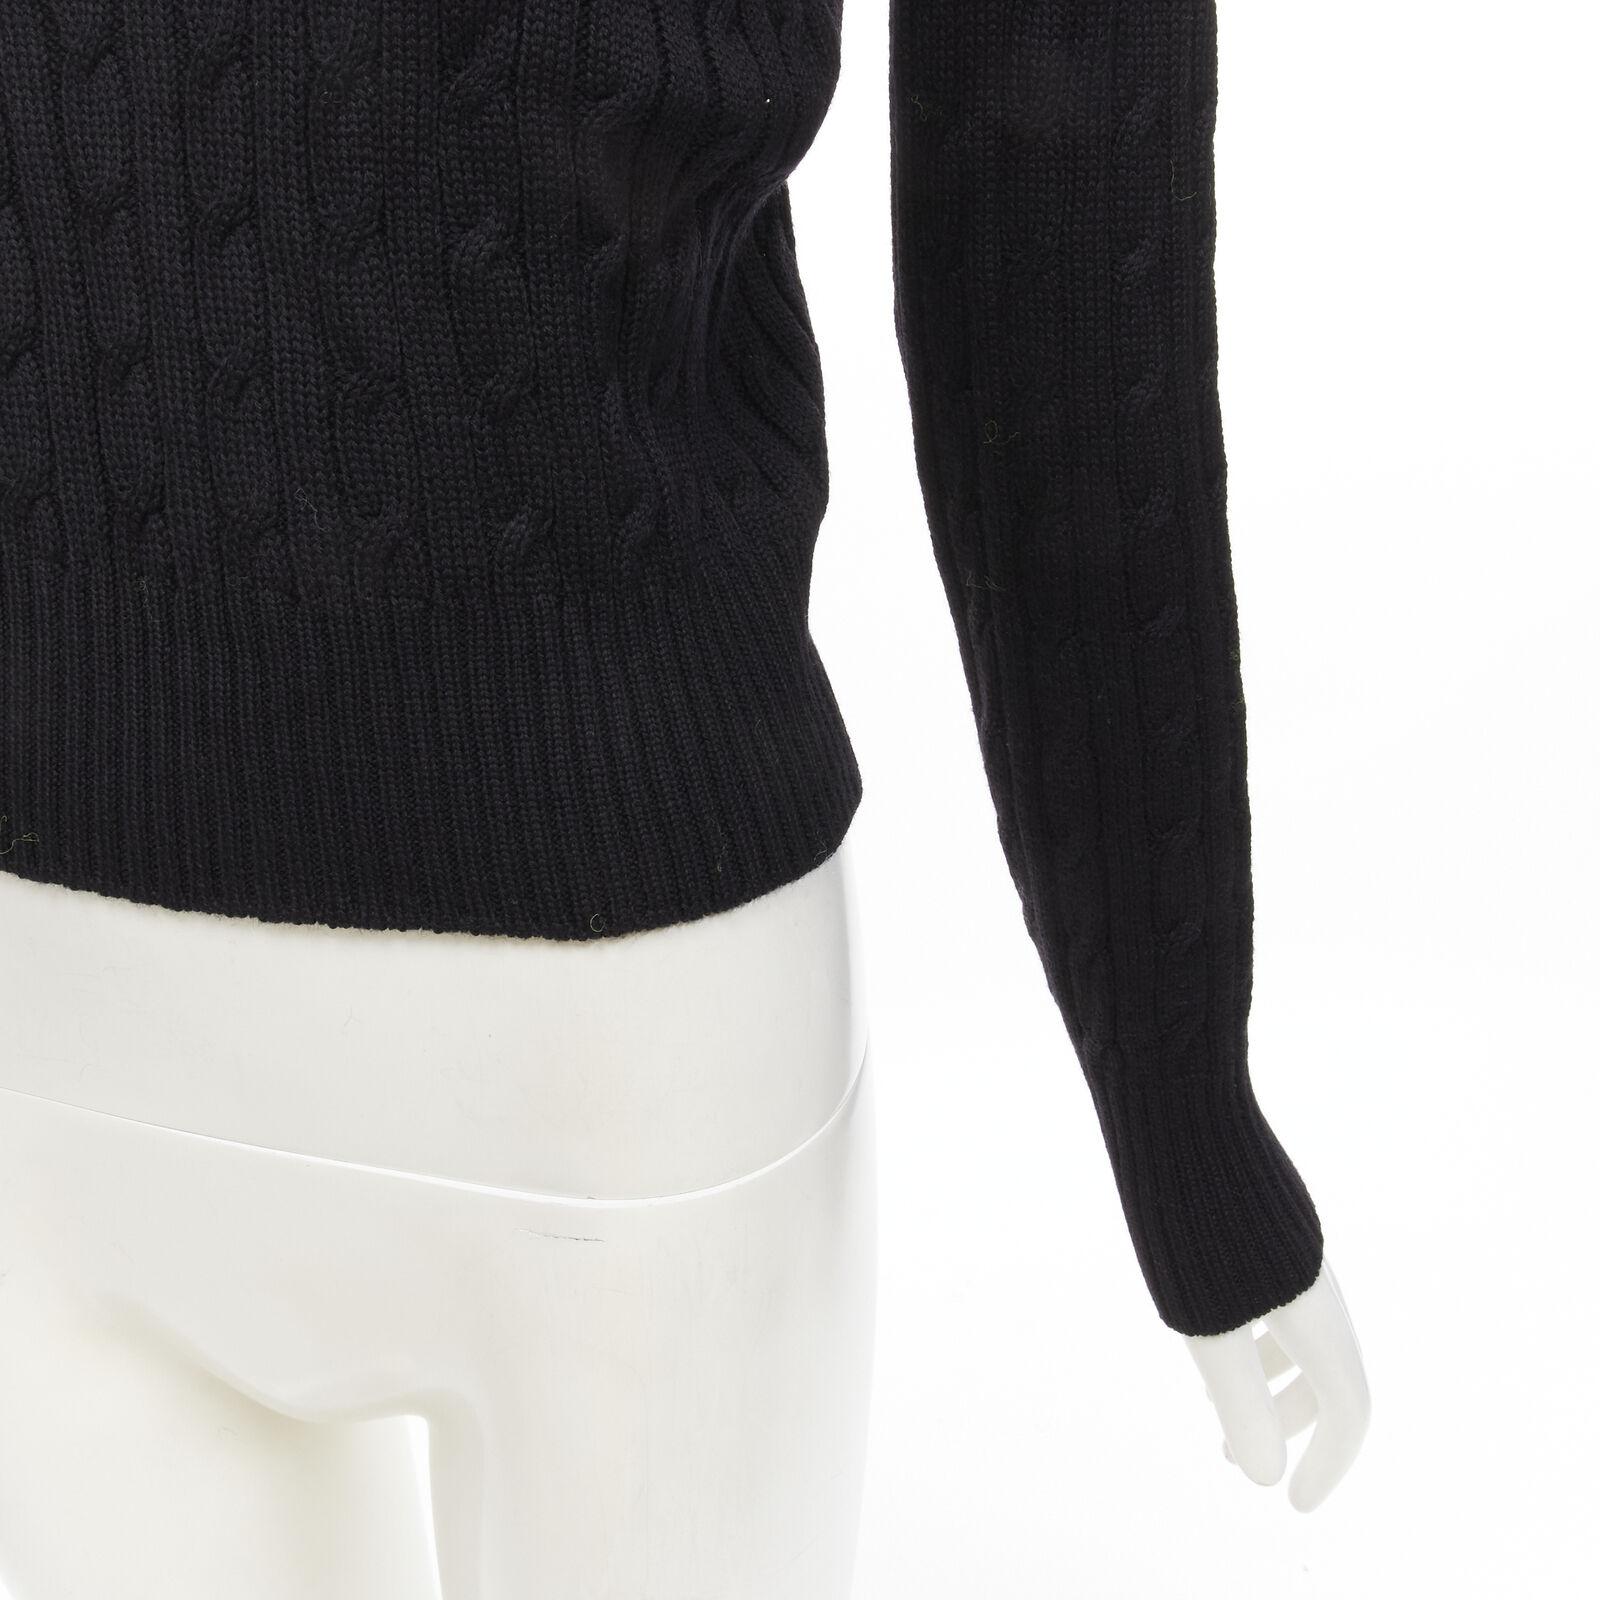 GIUSEPPE DI MORABITO black wool crystal embellished cable knit turtleneck IT38 For Sale 3